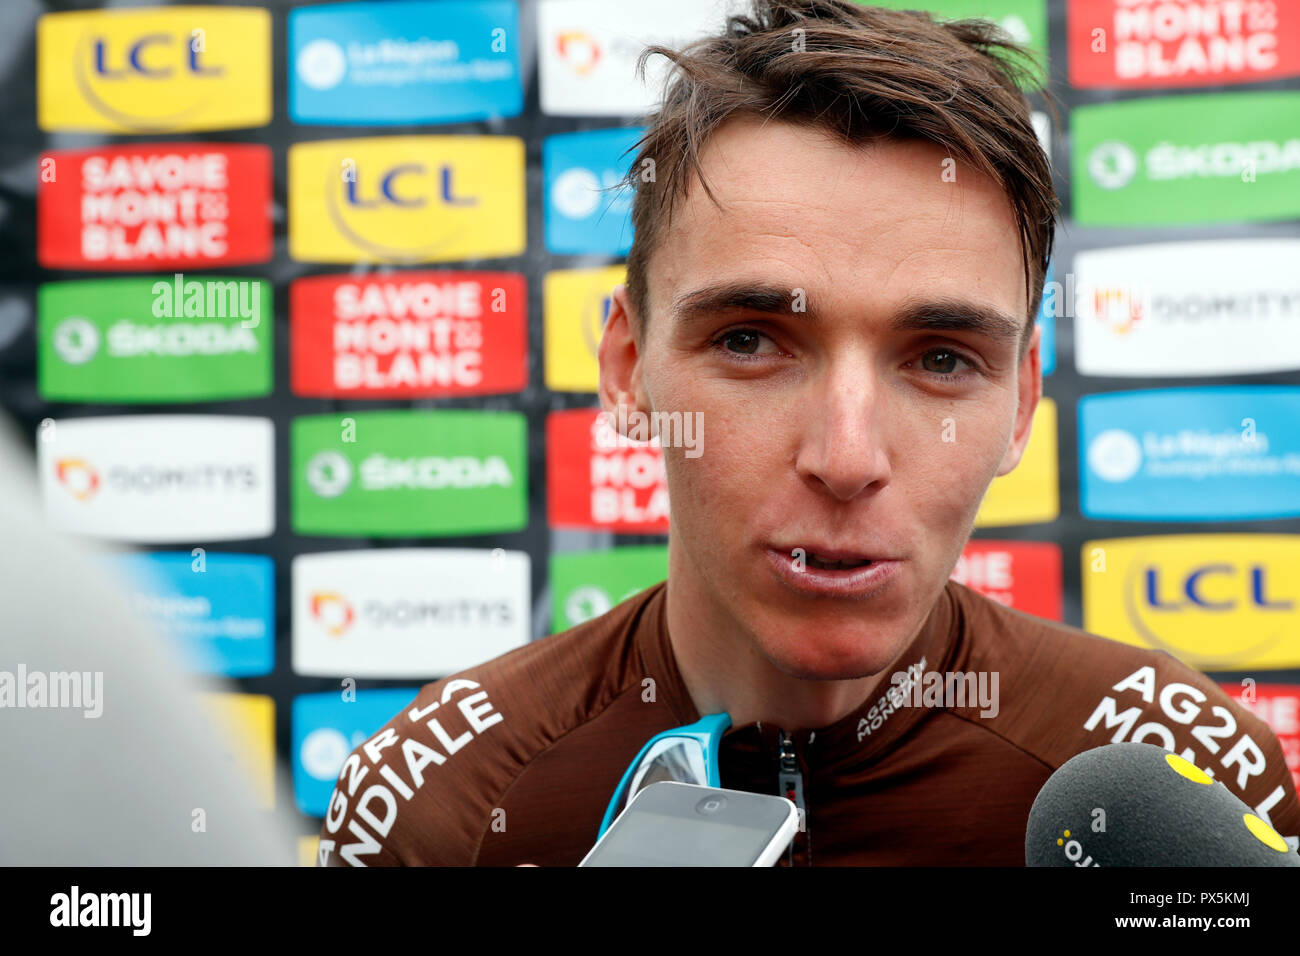 Criterium of Dauphine Libere cycling race 2018.  Romain Bardet.  Interview. Saint Gervais Mont Blanc. France. Stock Photo